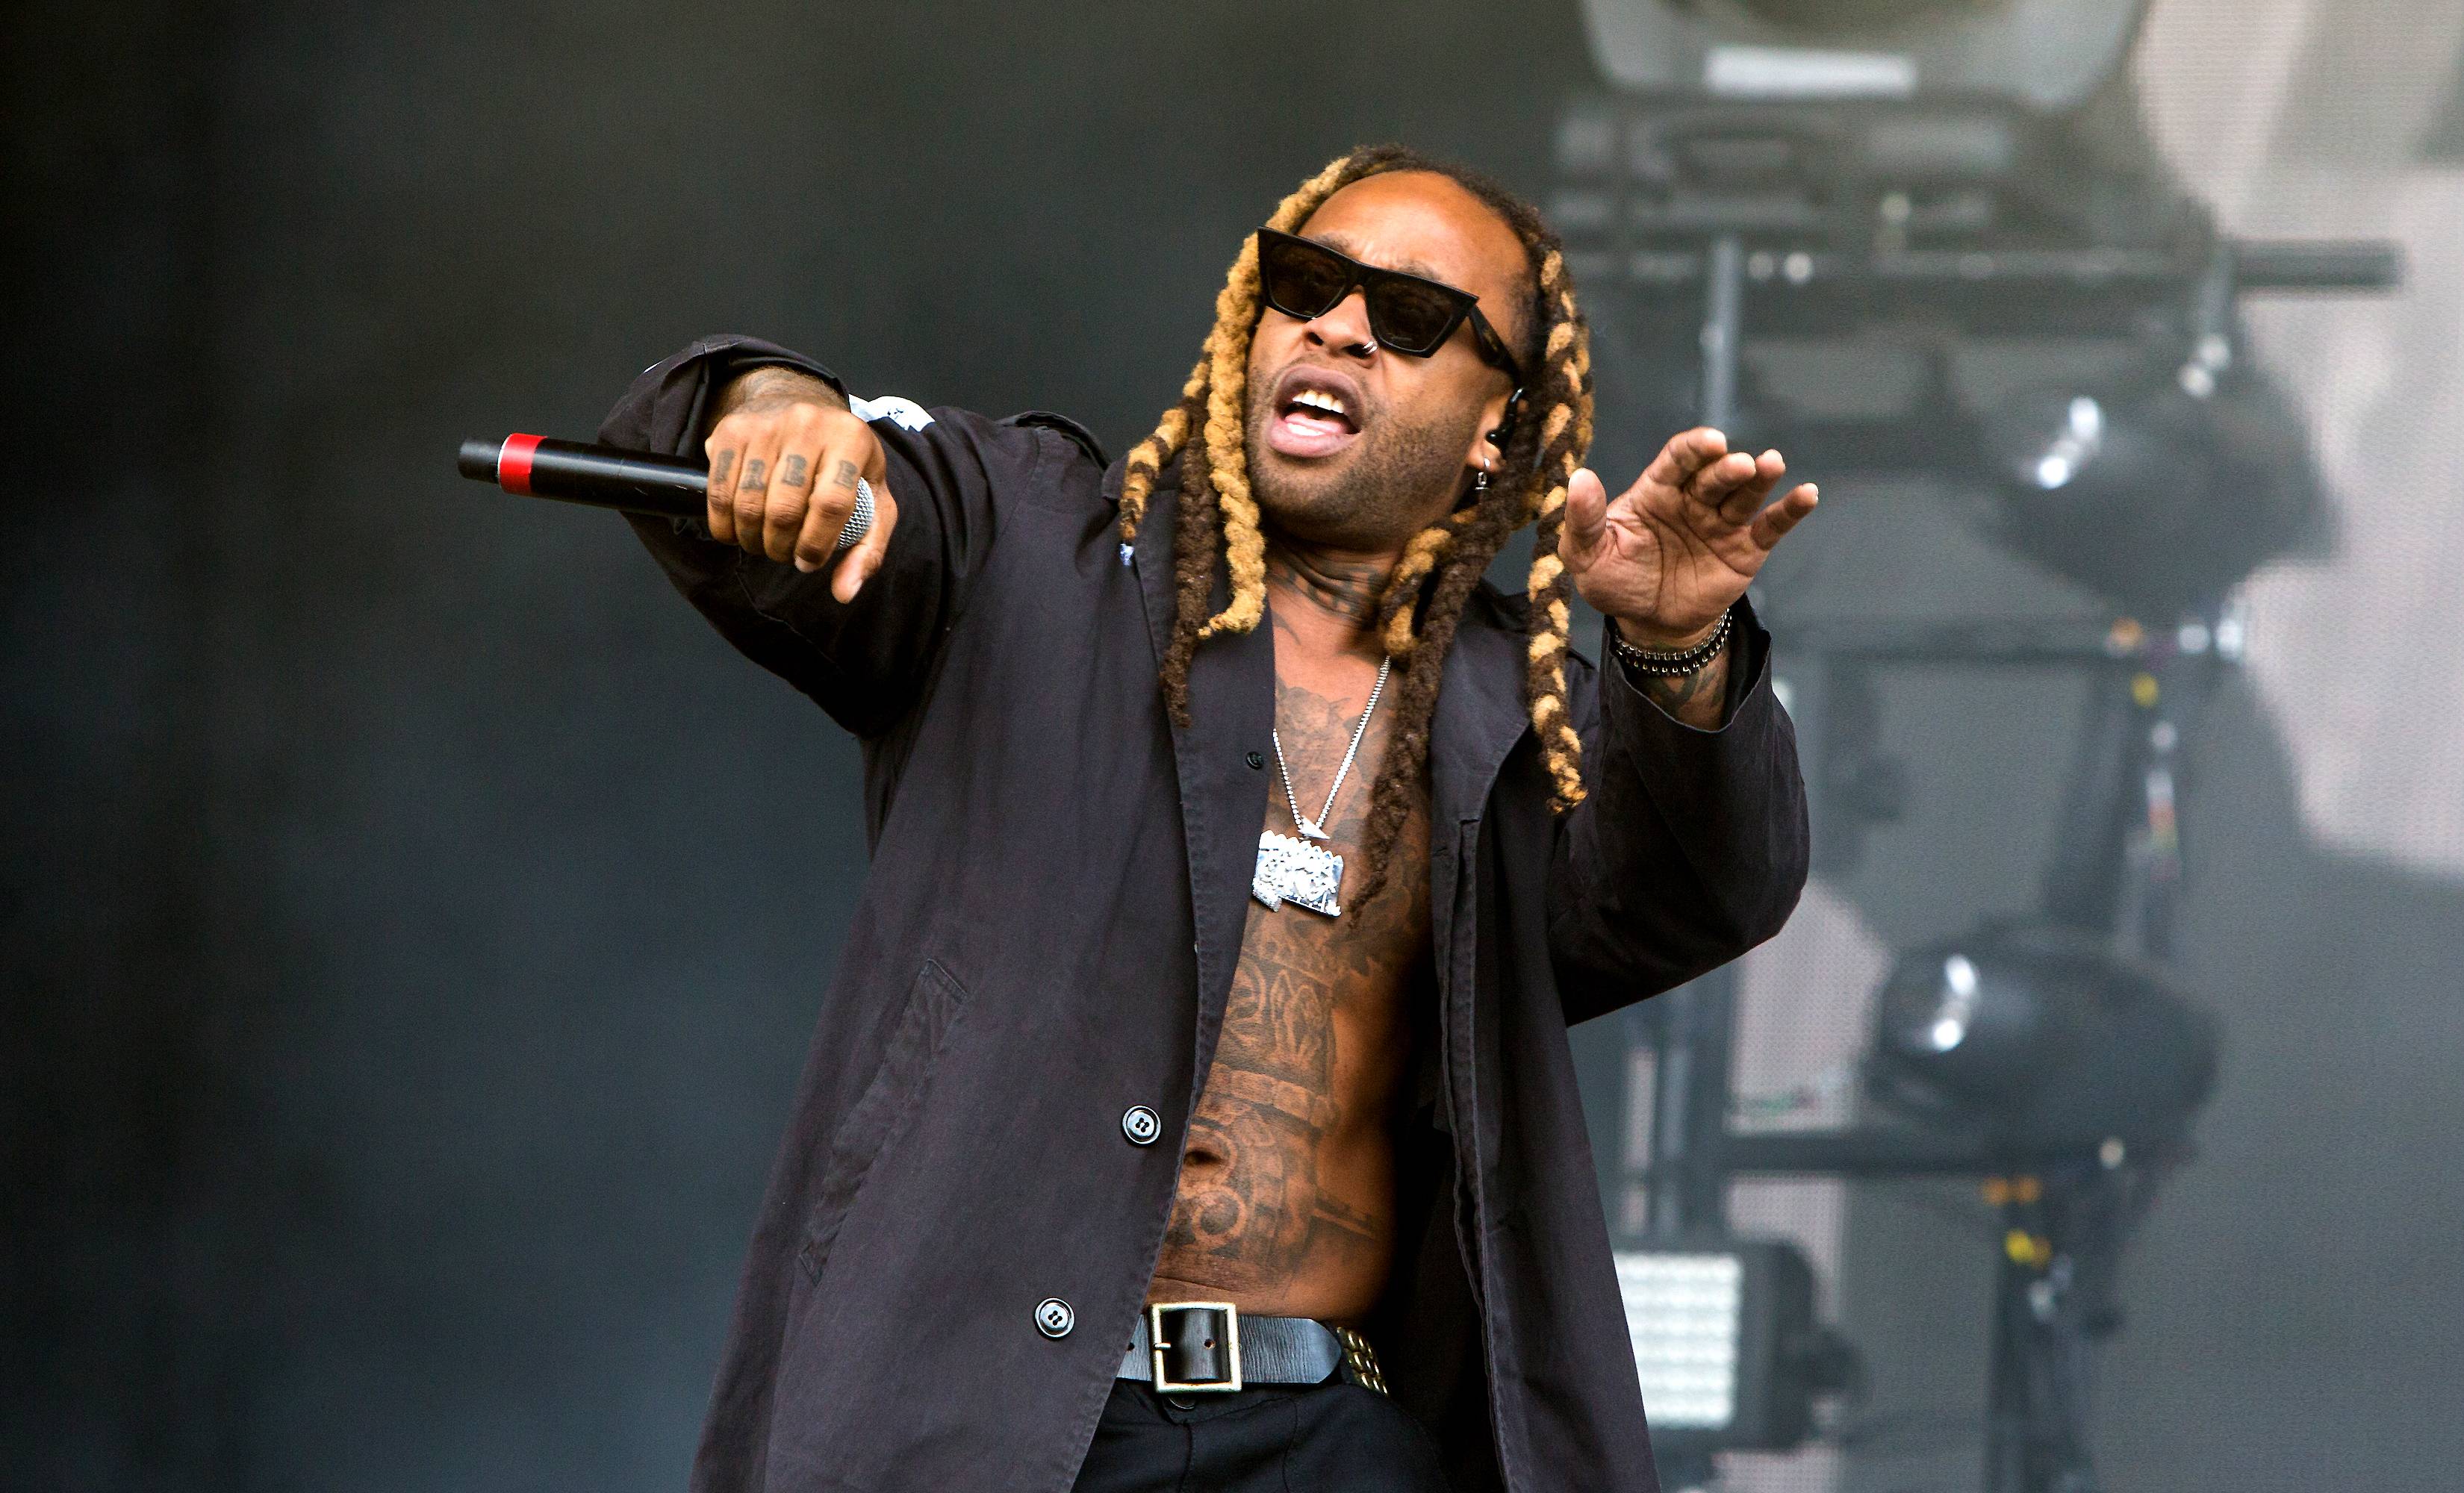 TY DOLLA $IGN - AIN'T NOTHING (JUICY J FEATURING WIZ KHALIFA AND TY DOLLA $IGN) - (Photo: Lorne Thomson/Getty Images)